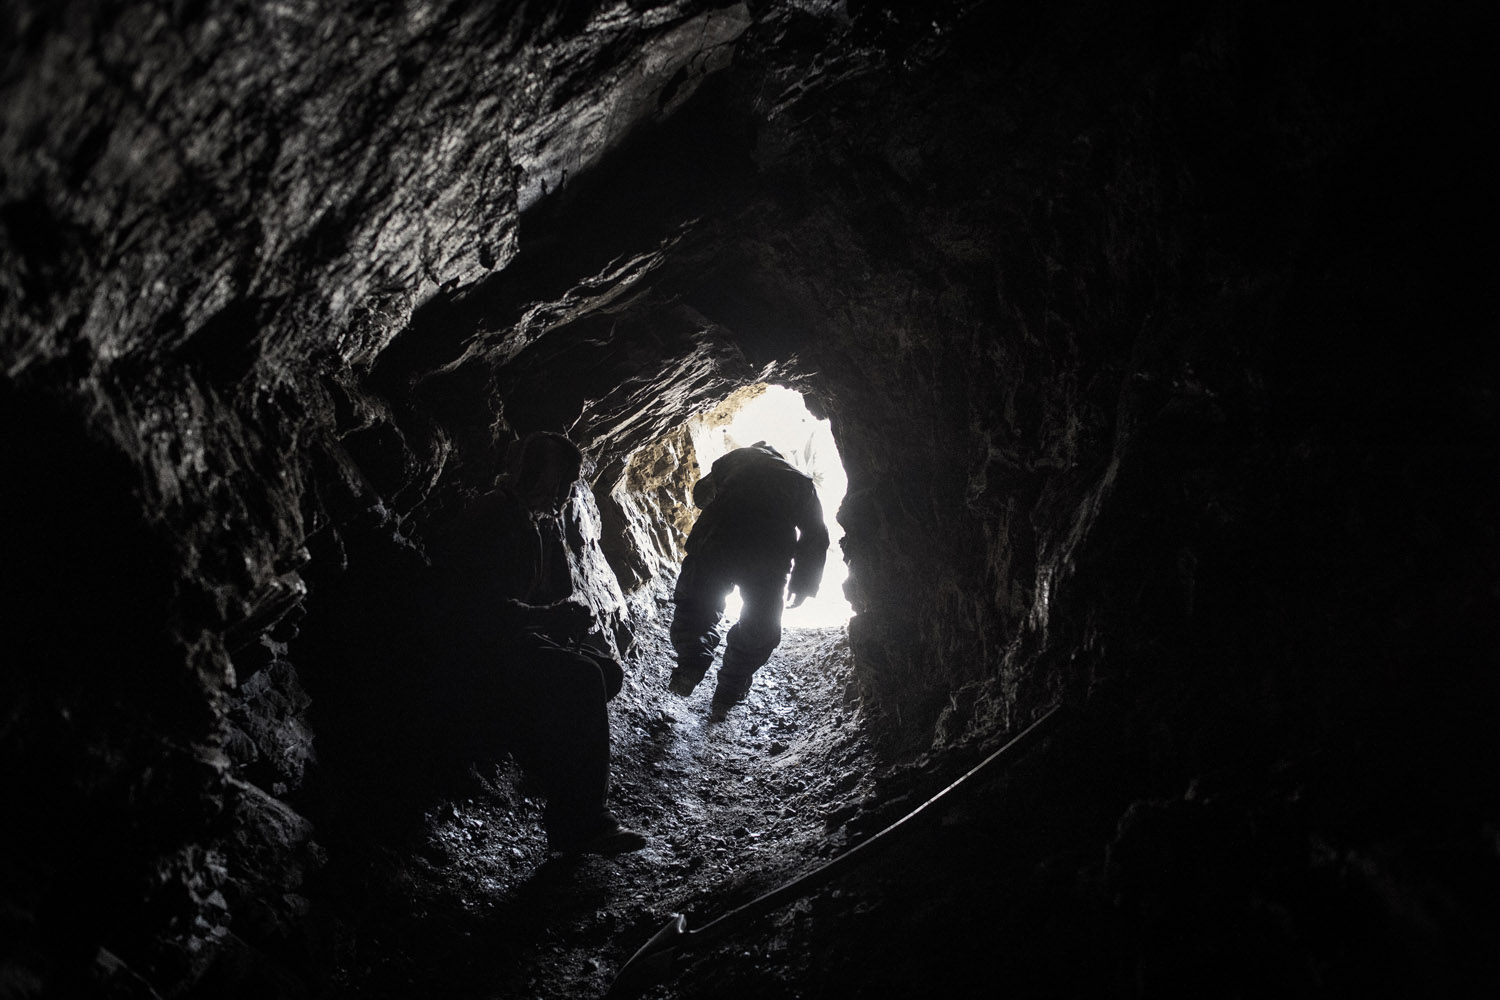 Panjshir Valley in north-central Afghanistan May 2013: A worker emerges from an emerald mine. After explosives are set off in the rocks, miners use large plastic tubes to draw out dust and smoke so they can go back in to work.